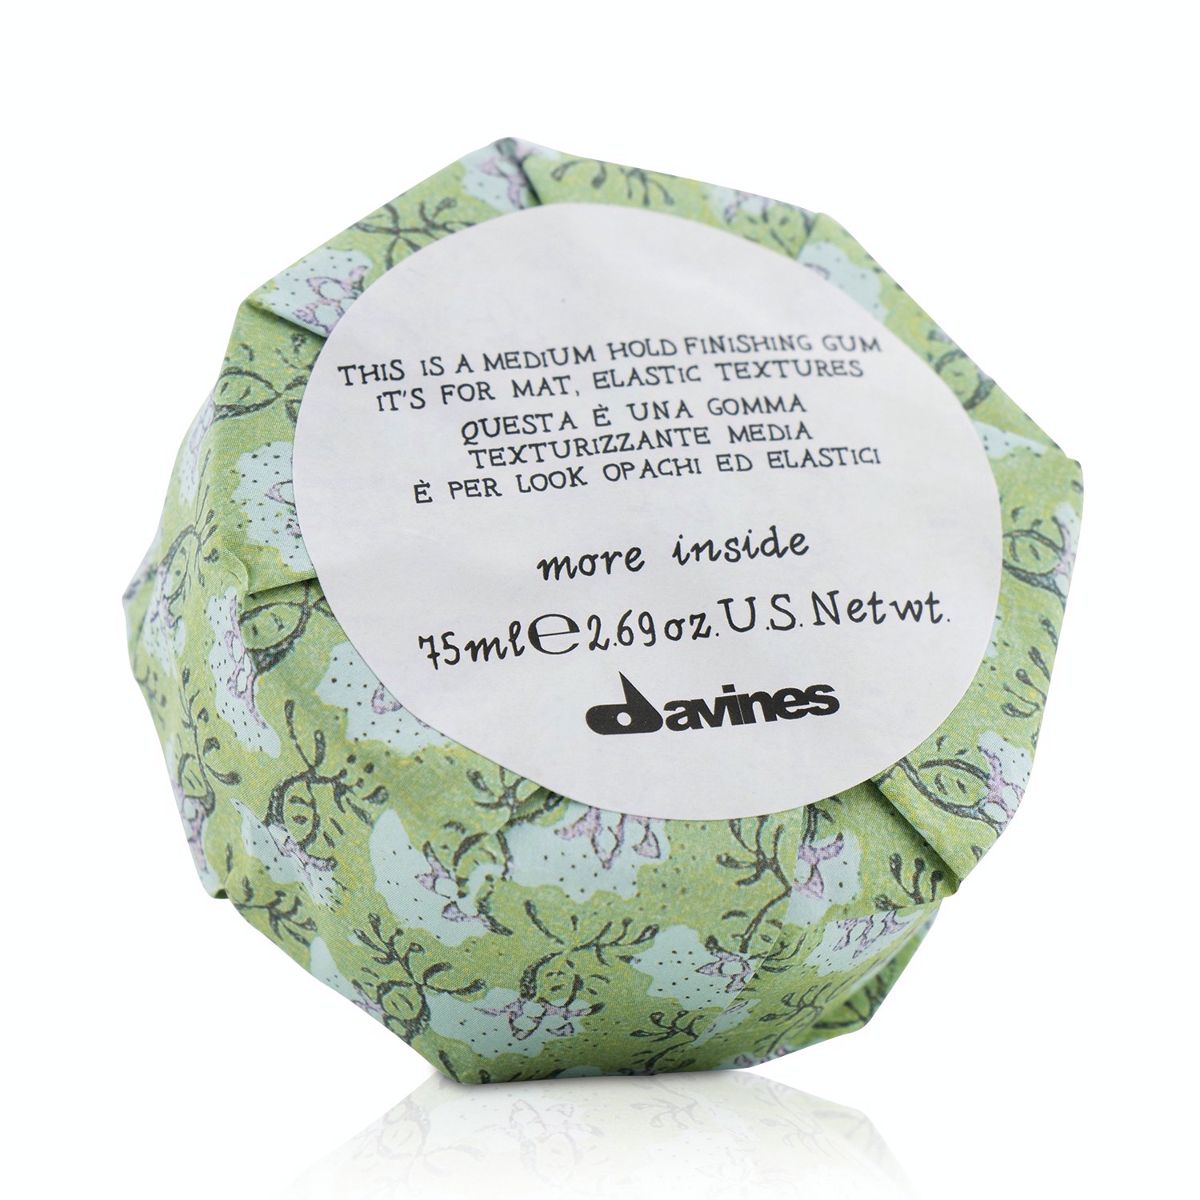 More Inside This Is A Medium Hold Finishing Gum (For Mat Elastic Textures) Davines Image